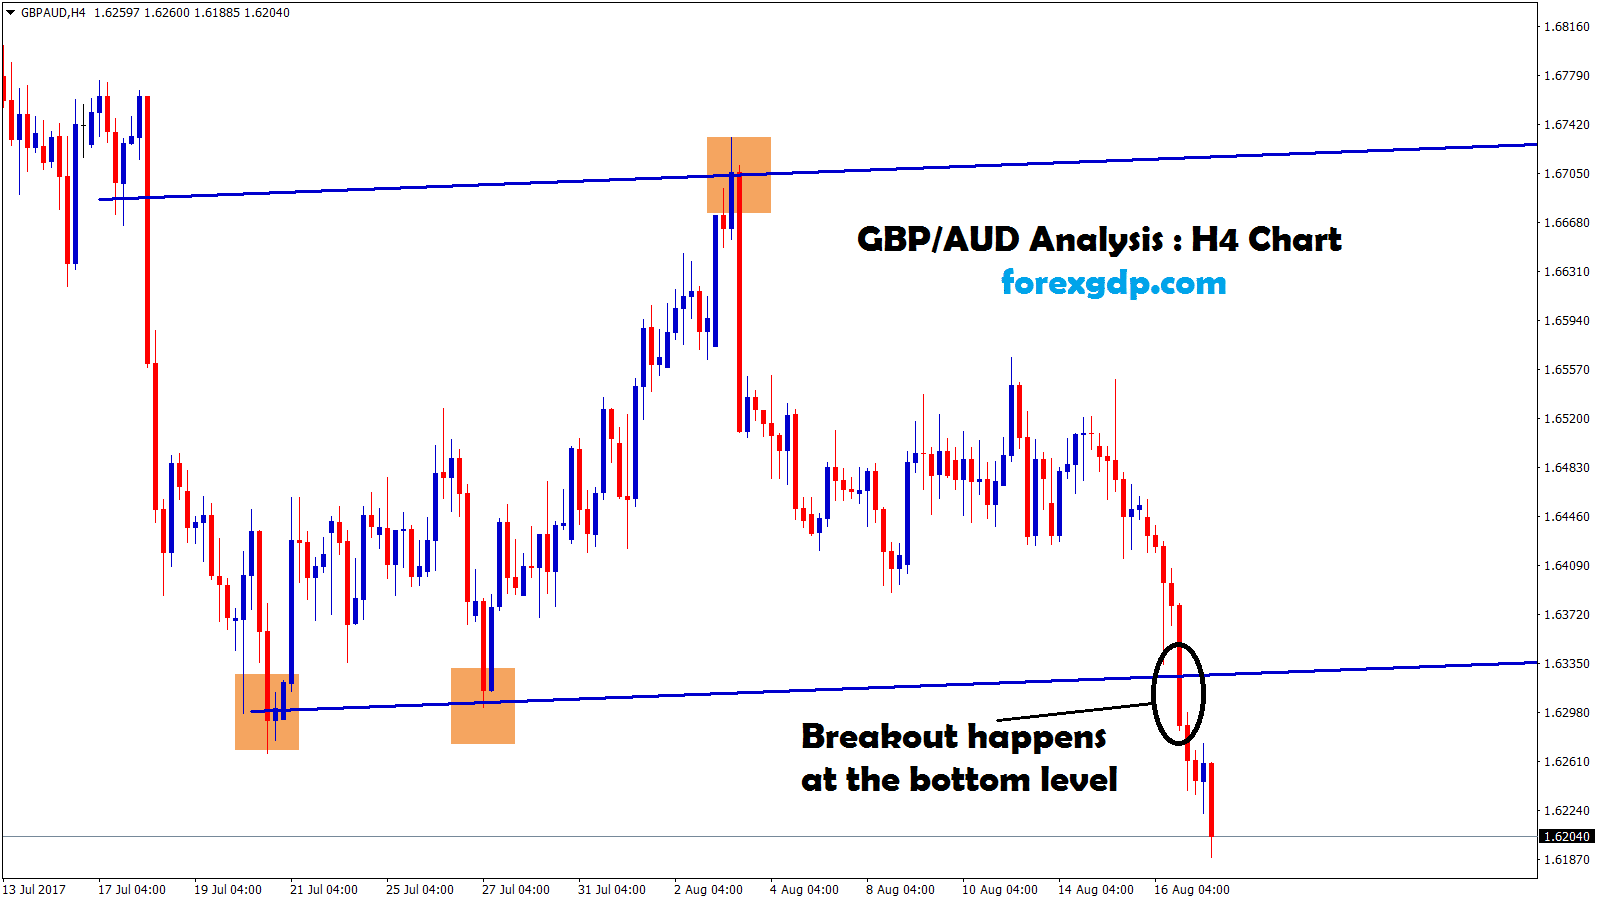 Breakout at the bottom lower support confirm sell trade signal in GBPAUD